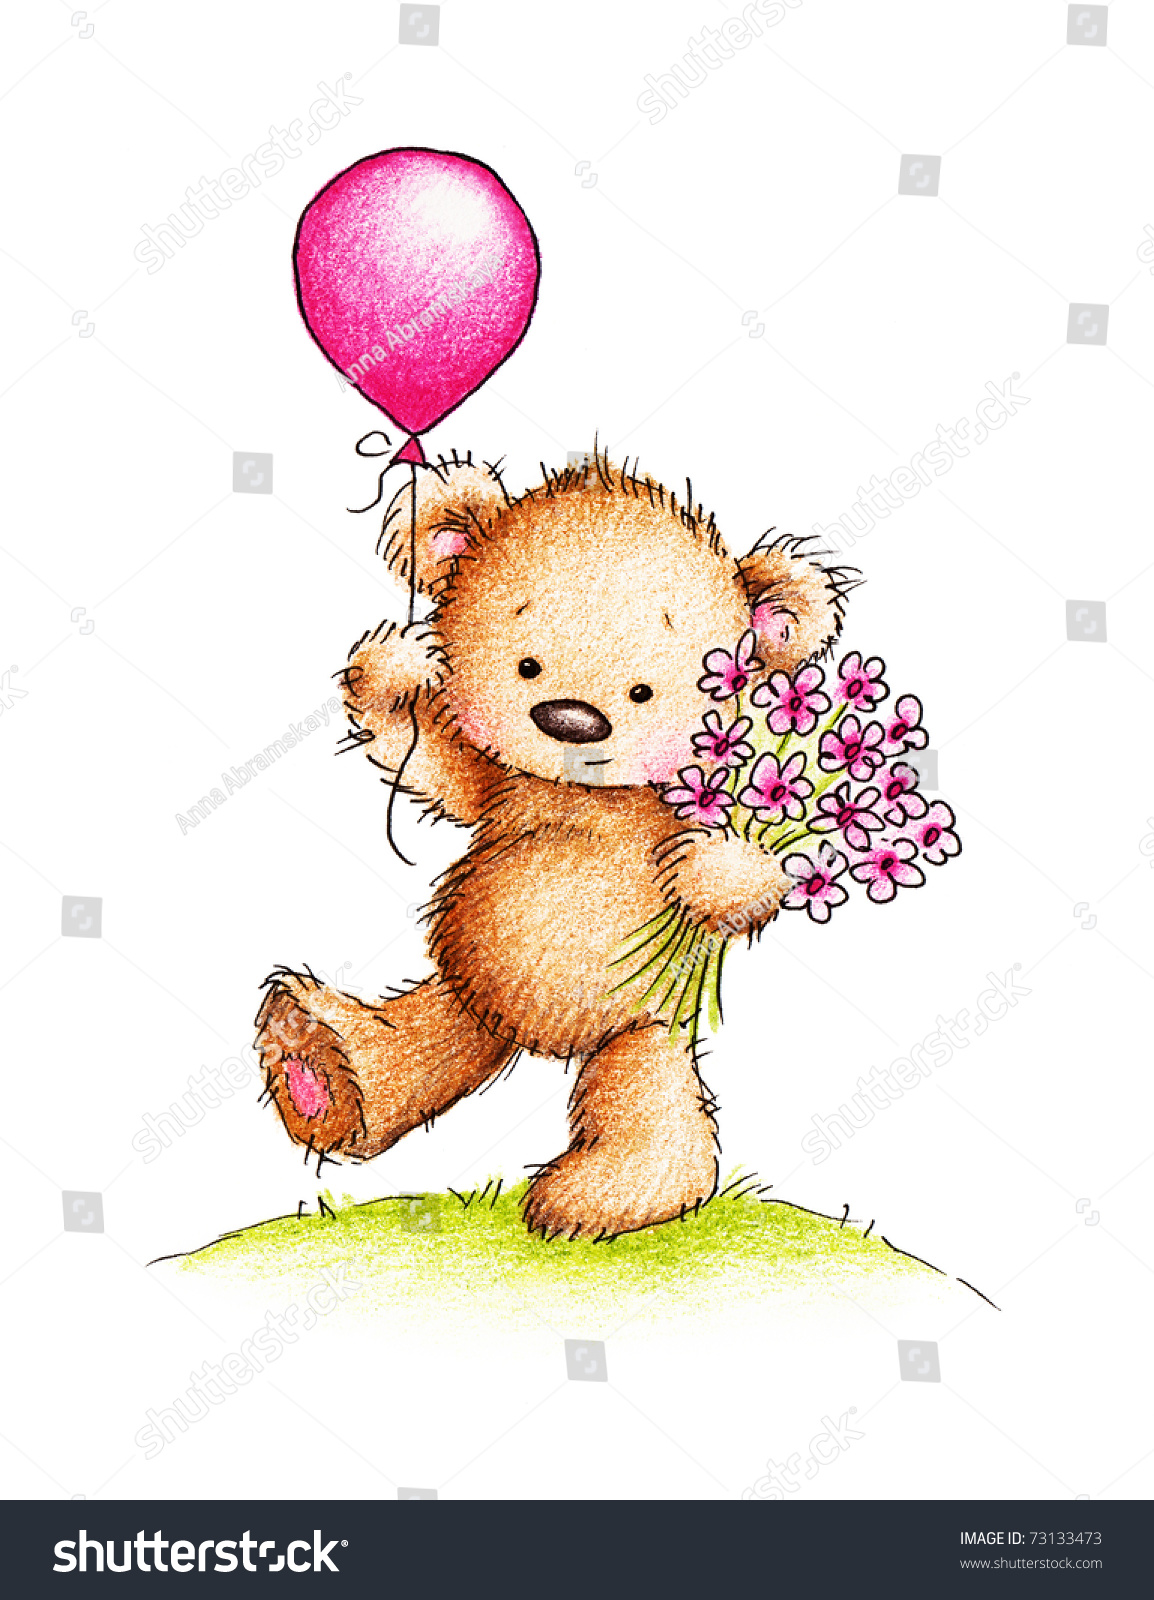 stock photo cute teddy bear with flowers and balloon on green lawn 73133473